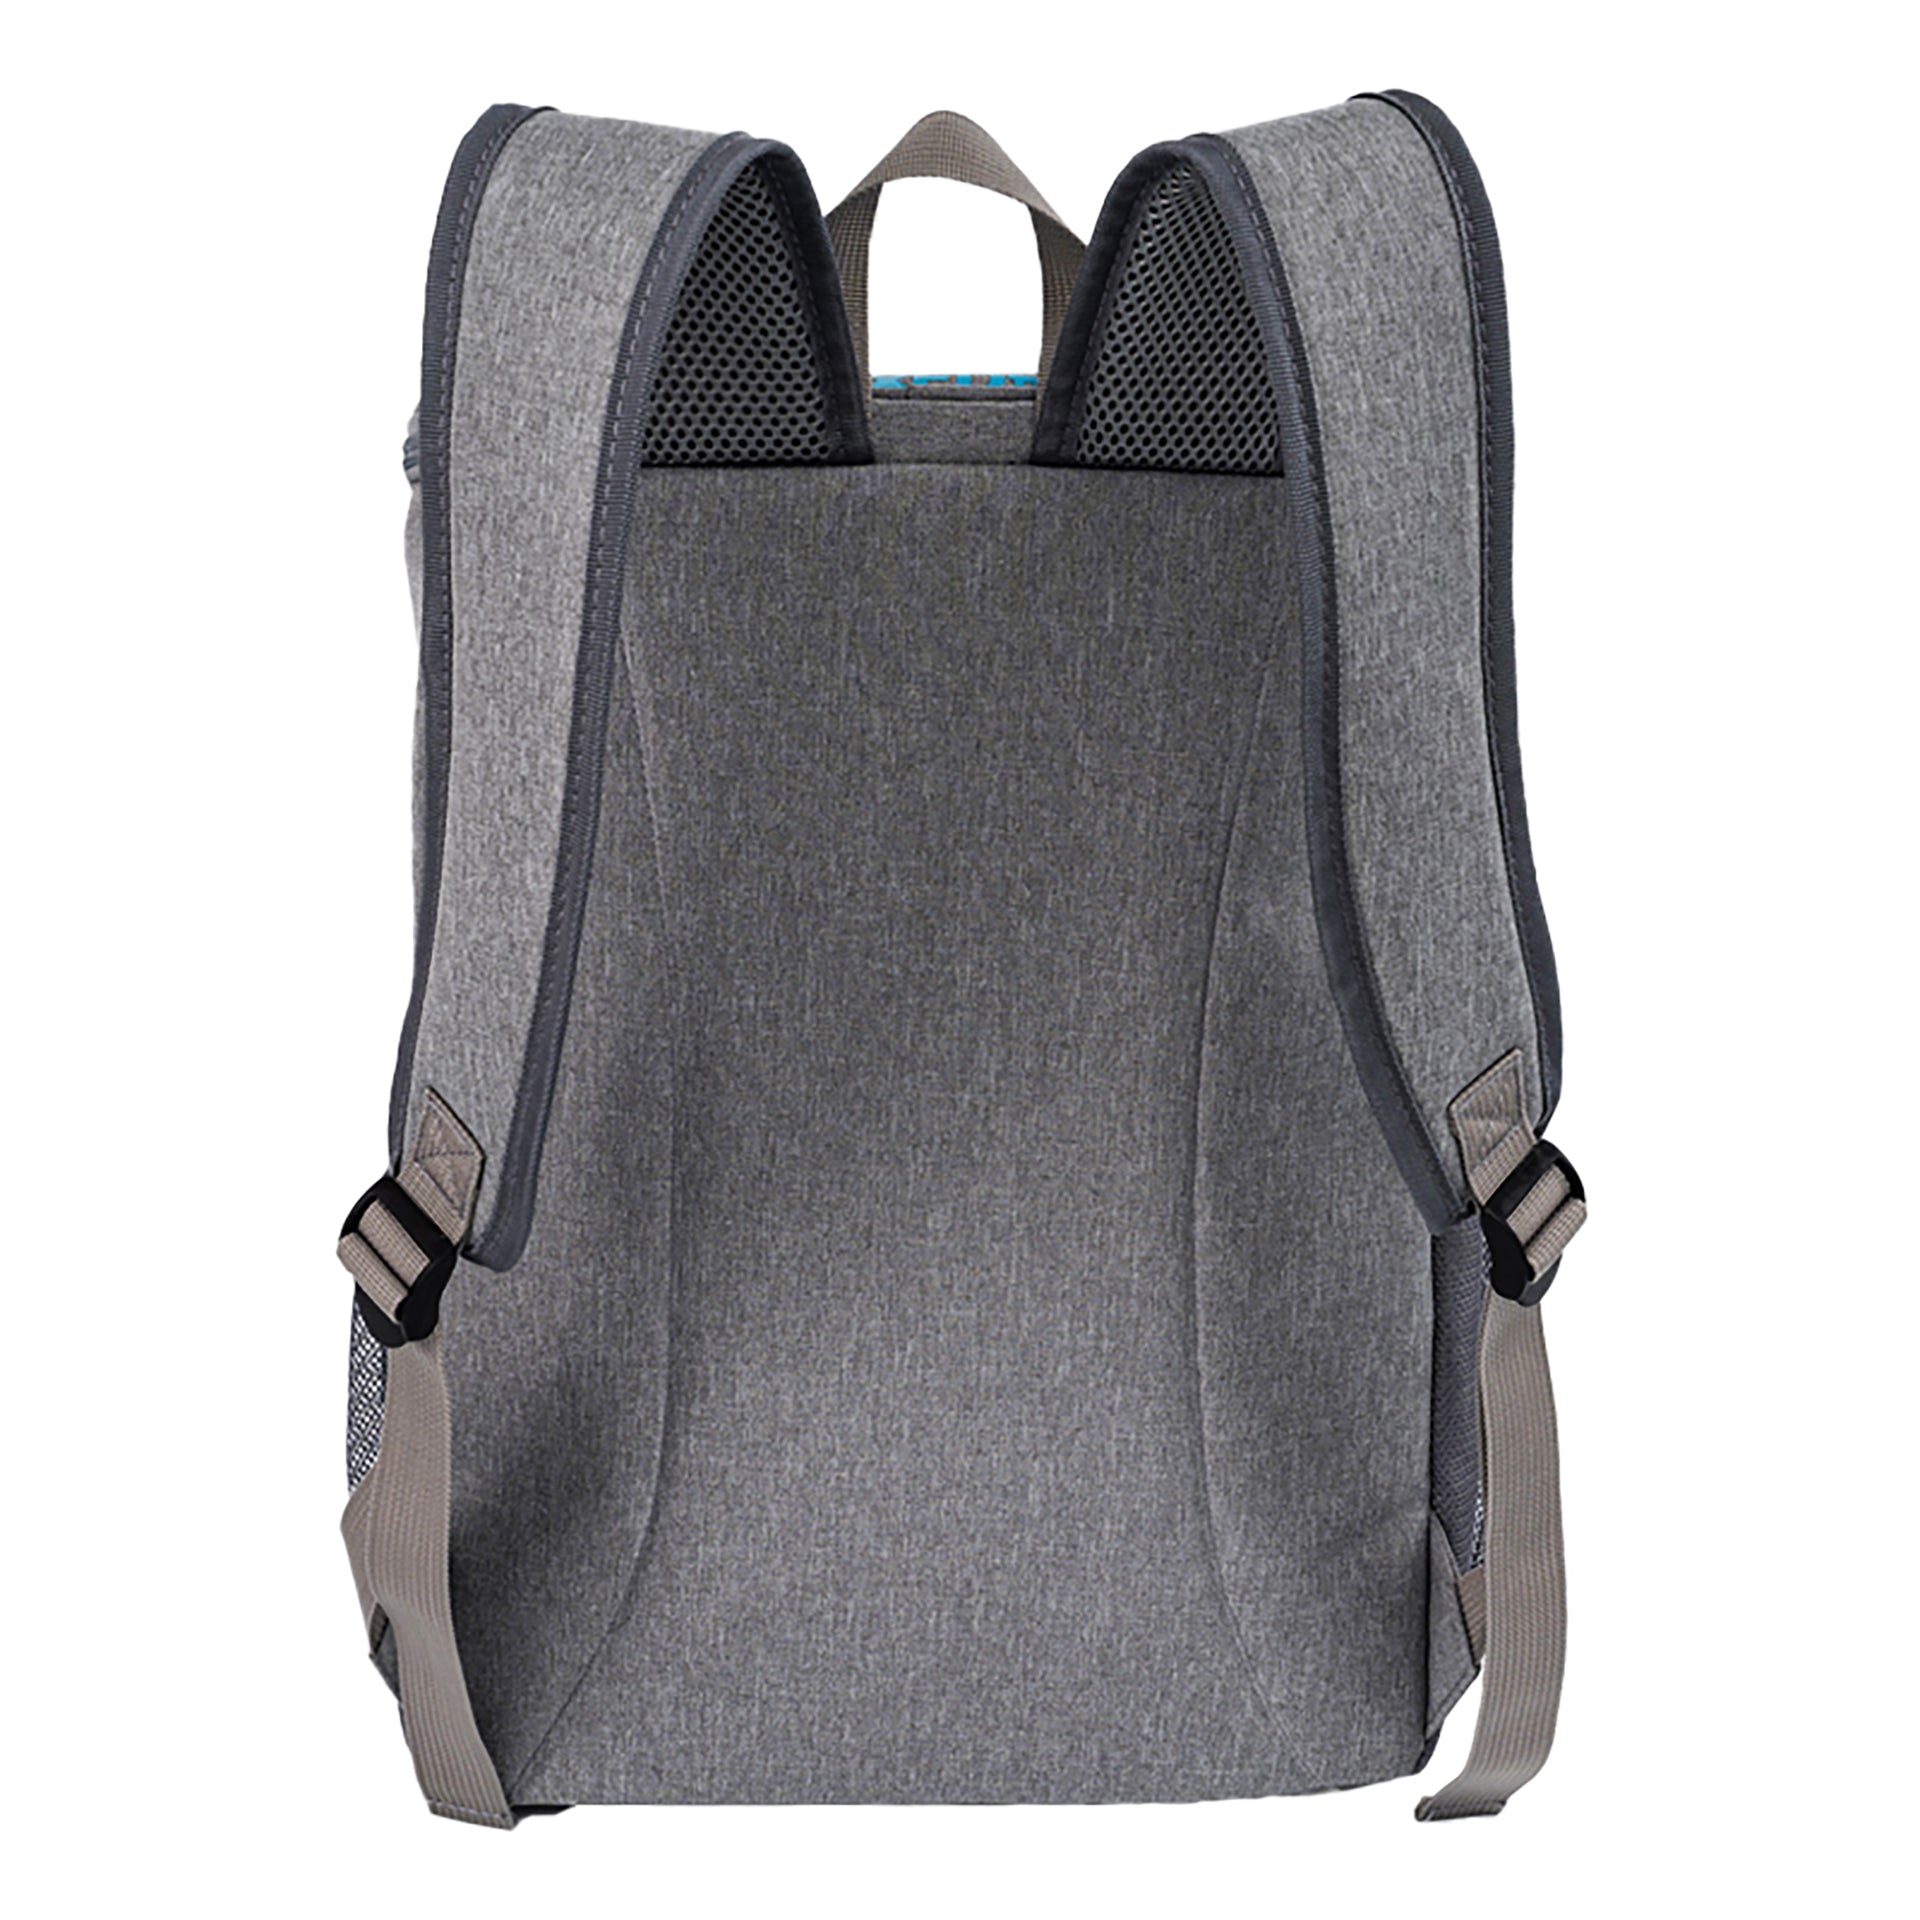 Biggdesign Moods Up Curious Insulated Backpack